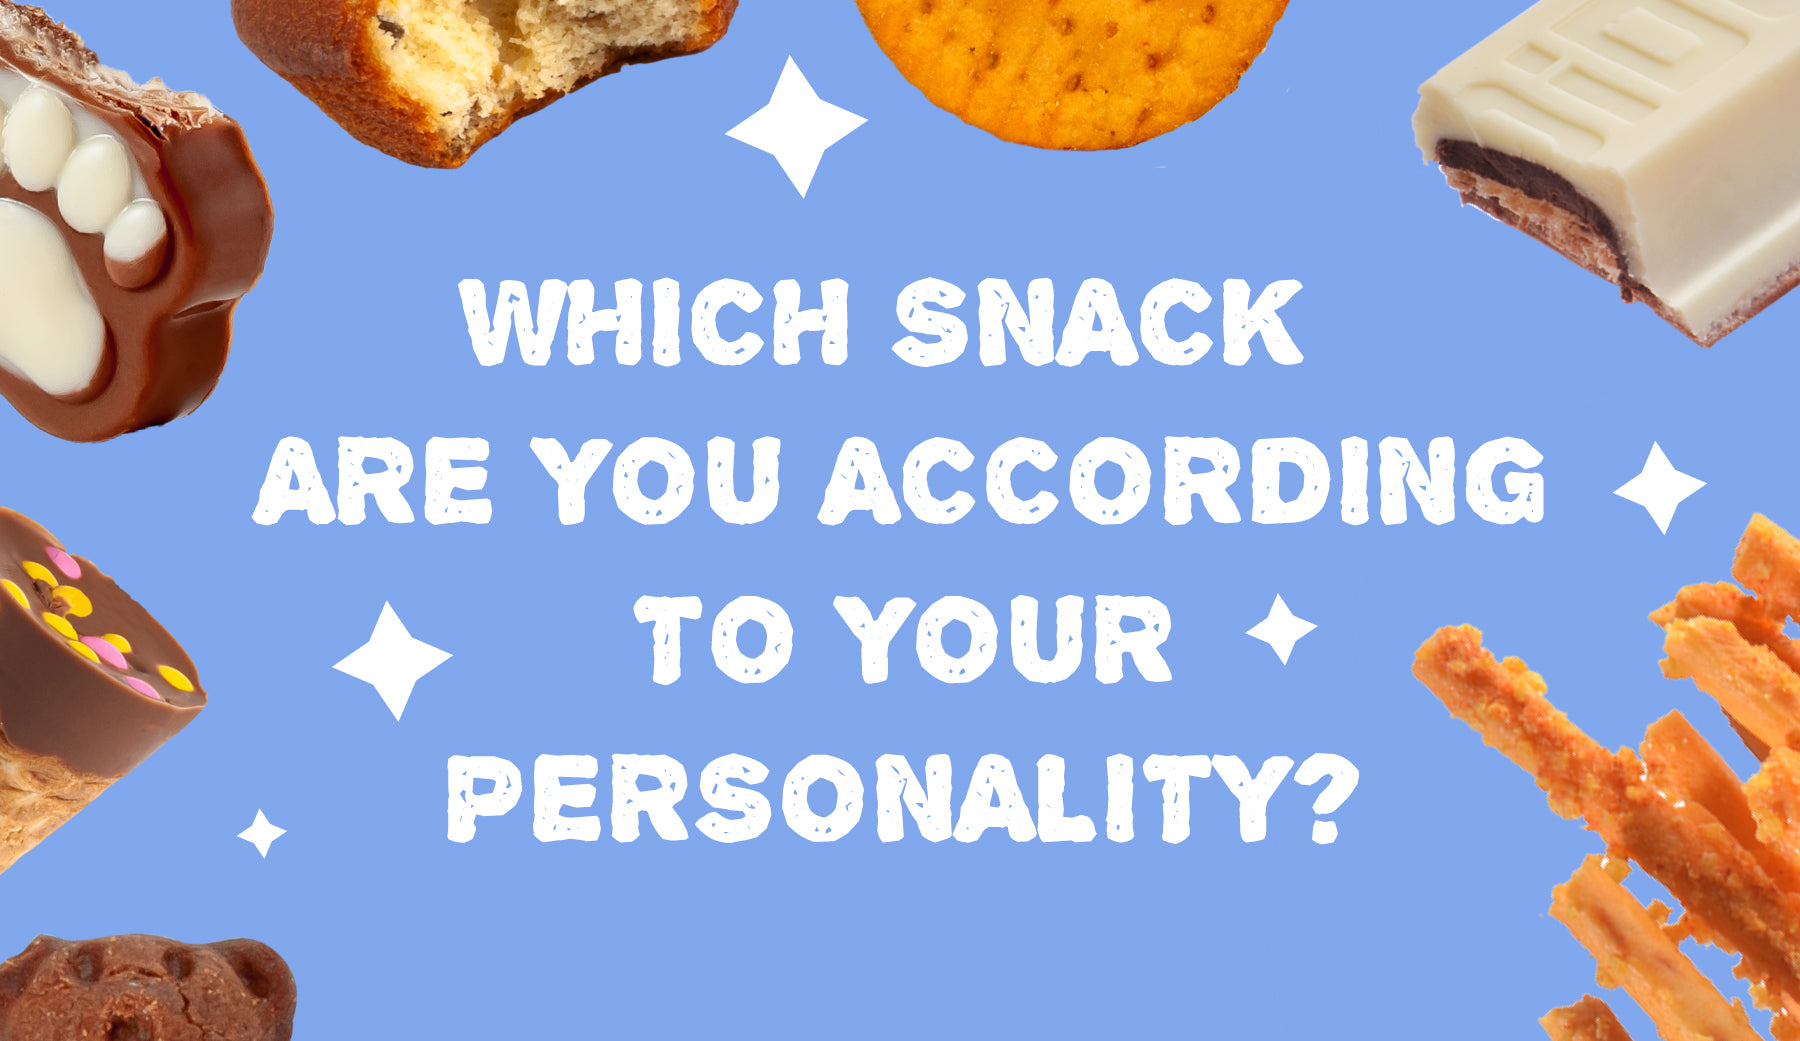 Which Snack Are You According To Your Personality?